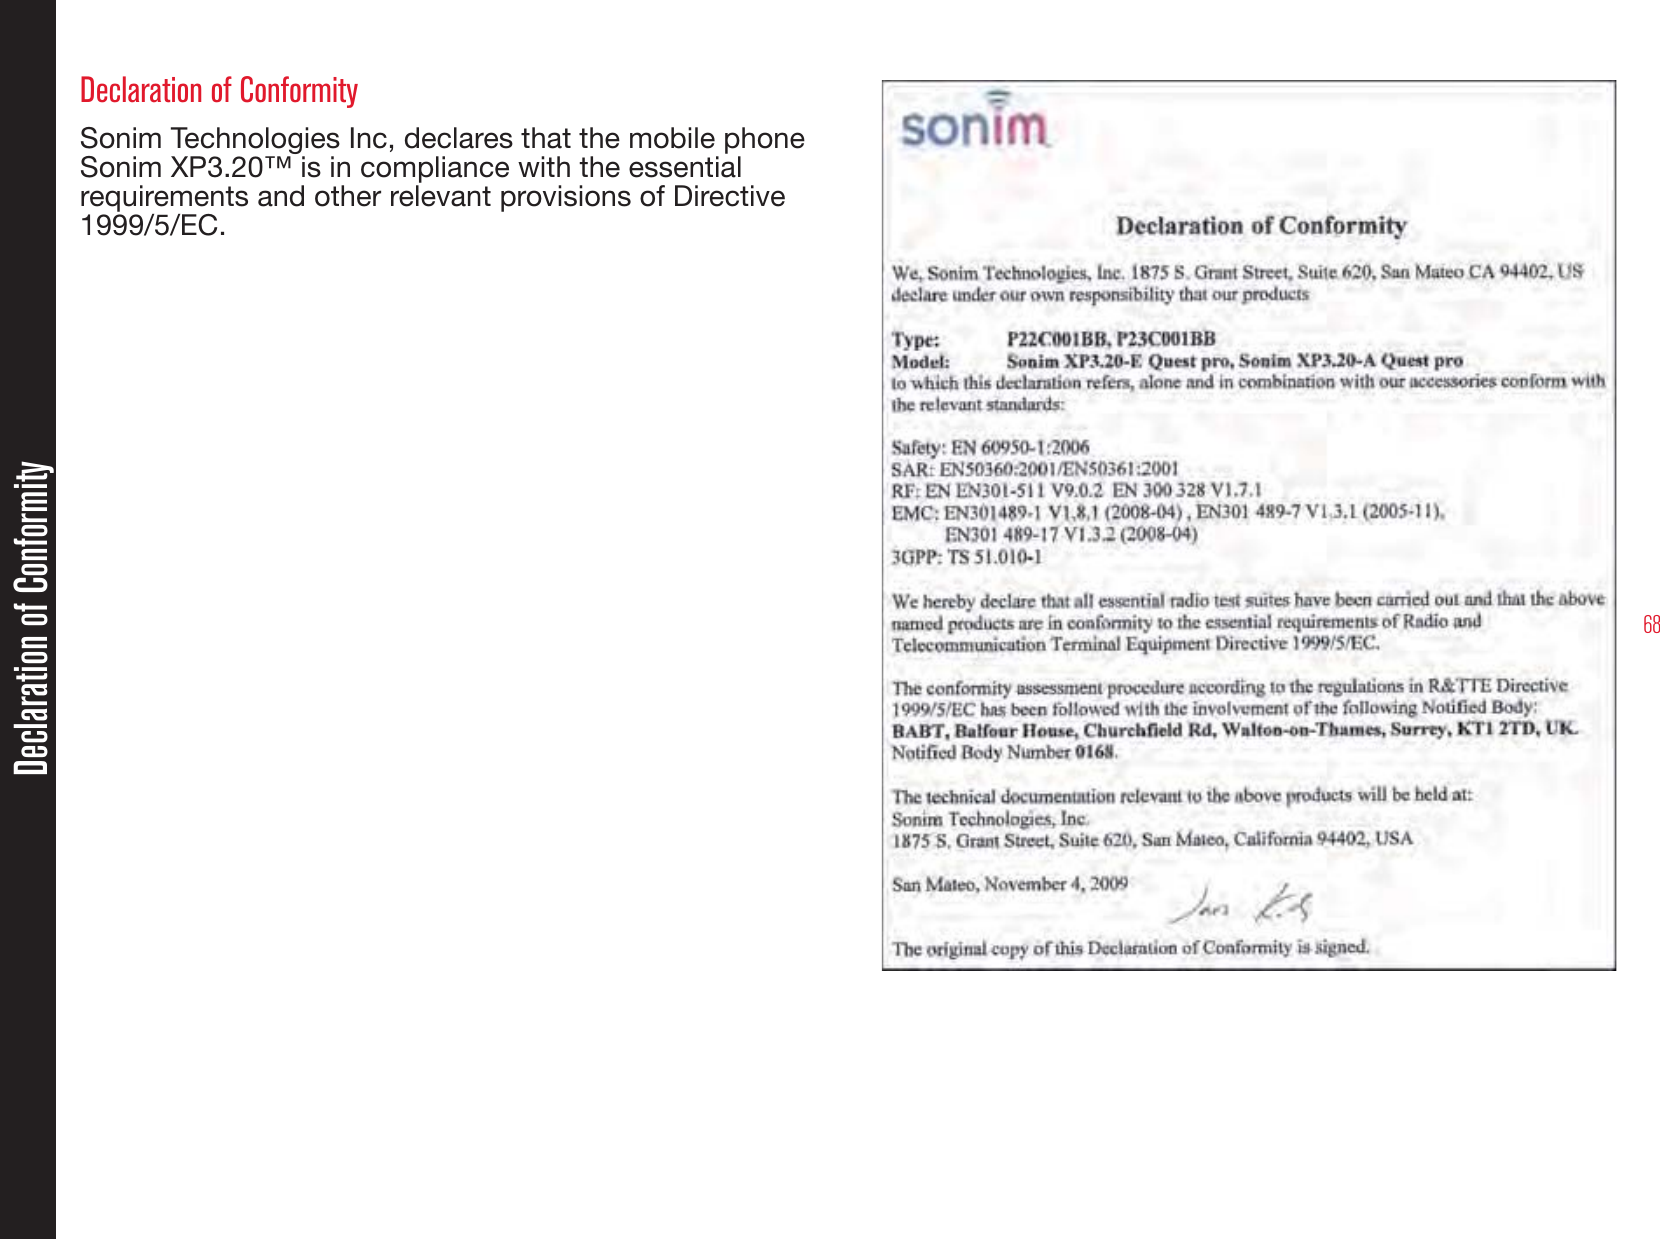 68Declaration of Conformity Sonim Technologies Inc, declares that the mobile phone Sonim XP3.20™ is in compliance with the essential requirements and other relevant provisions of Directive 1999/5/EC.Declaration of Conformity